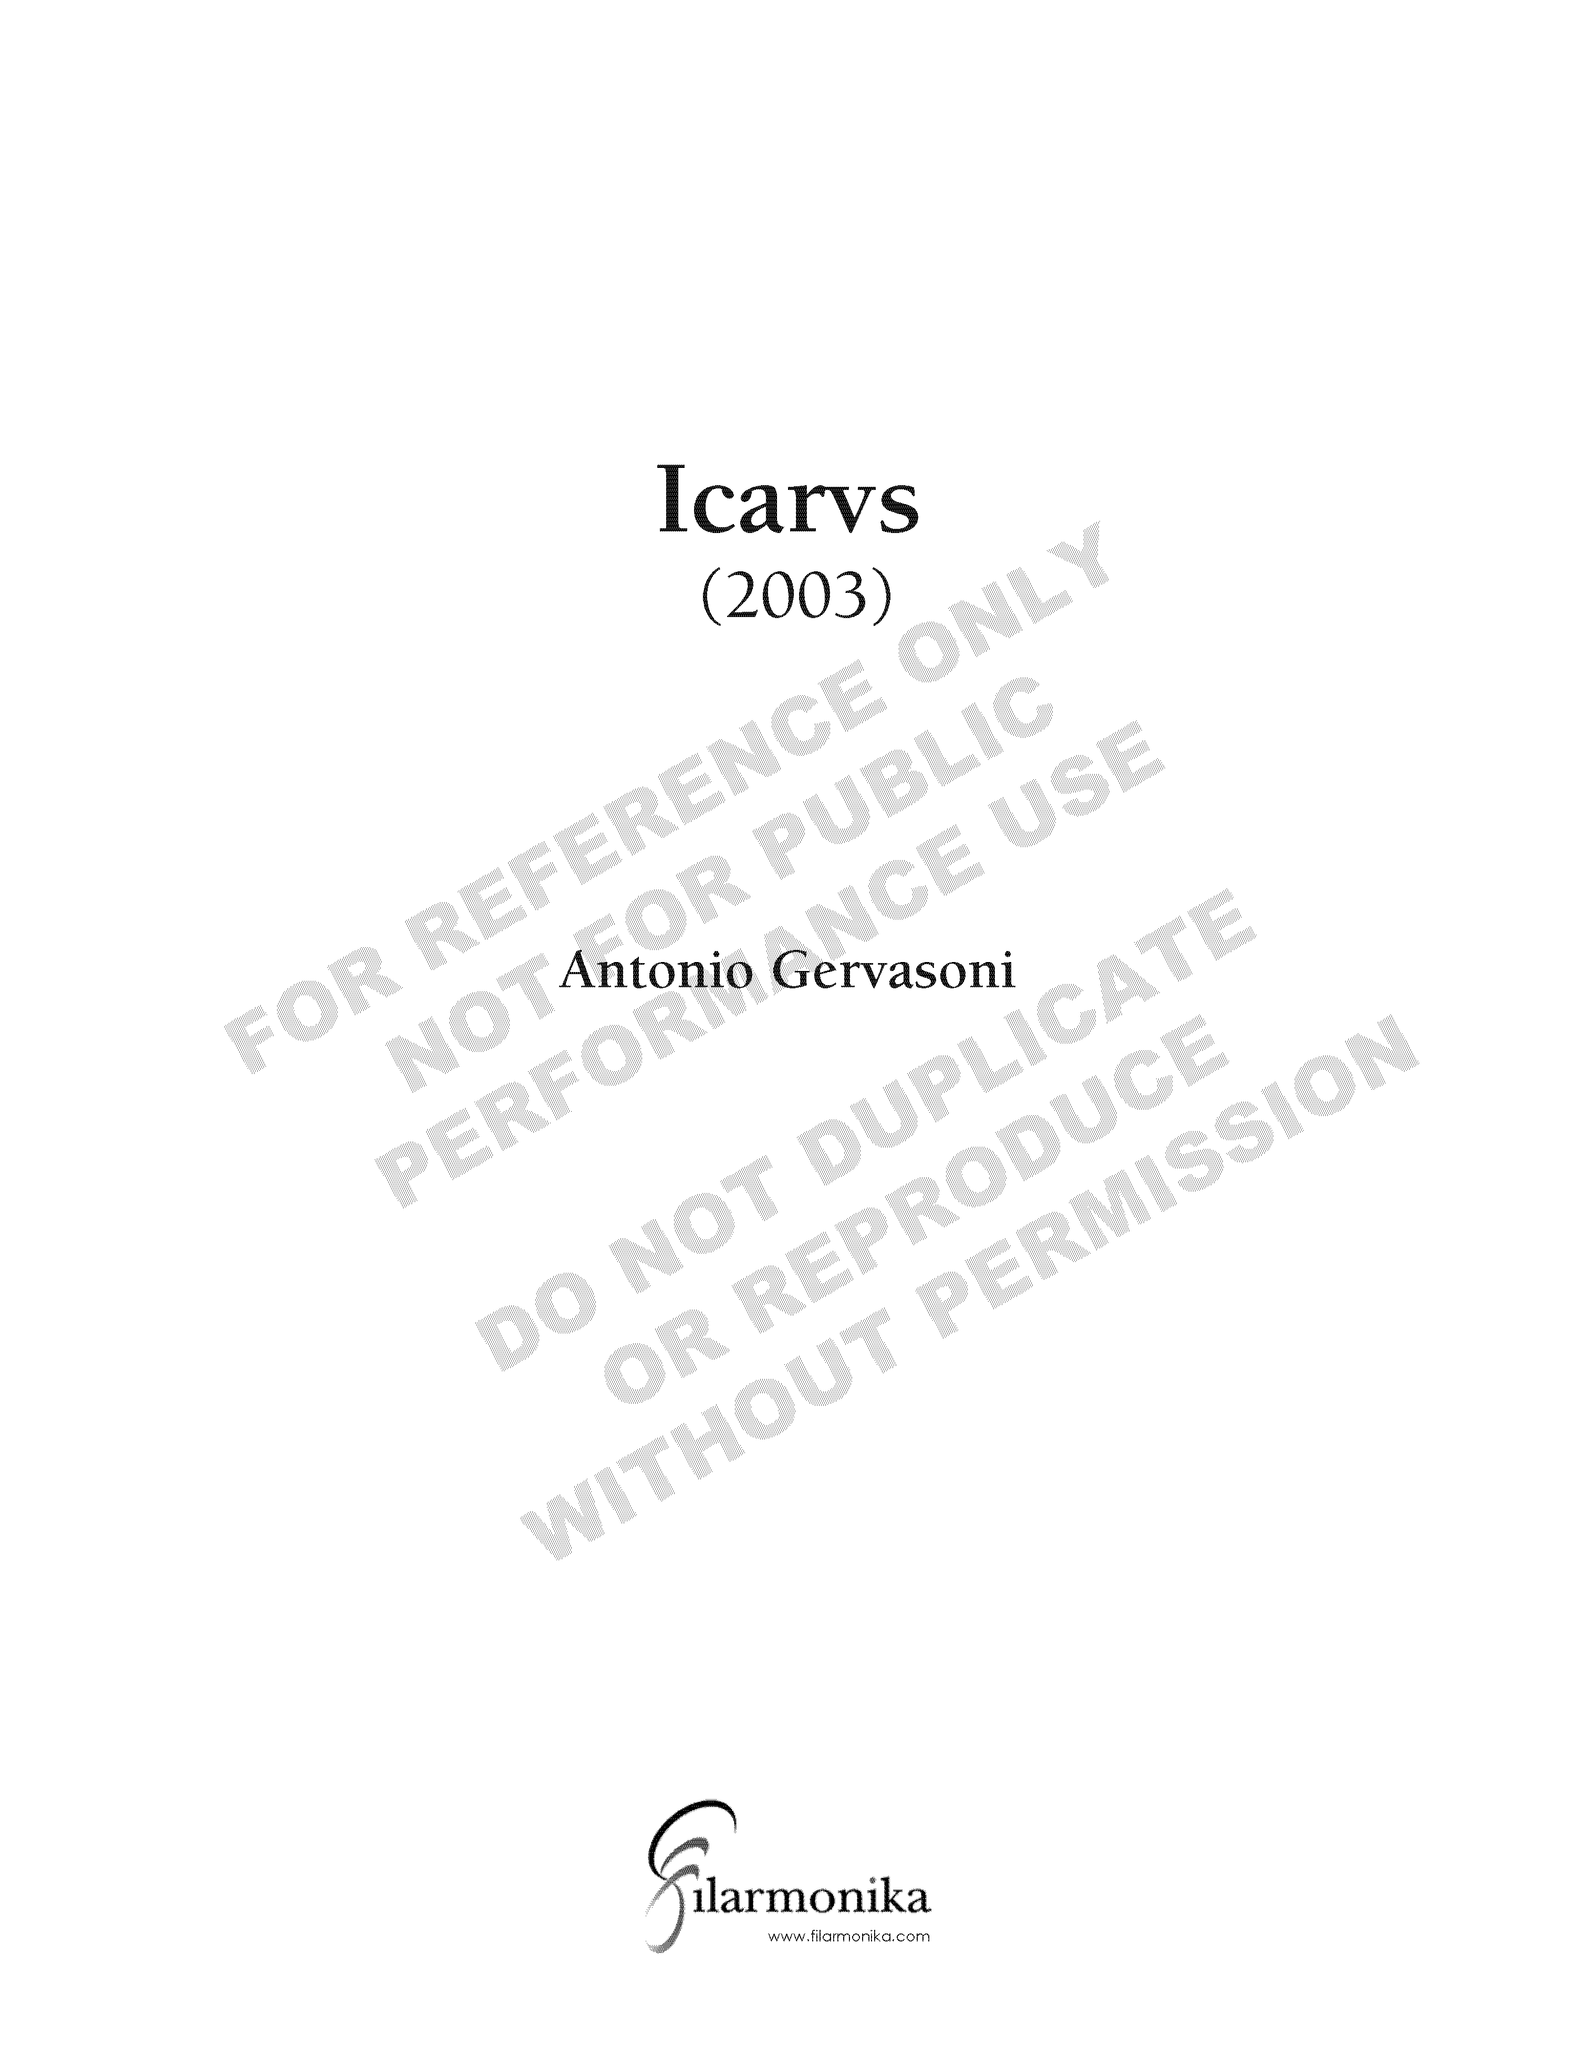 Icarvs, for orchestra